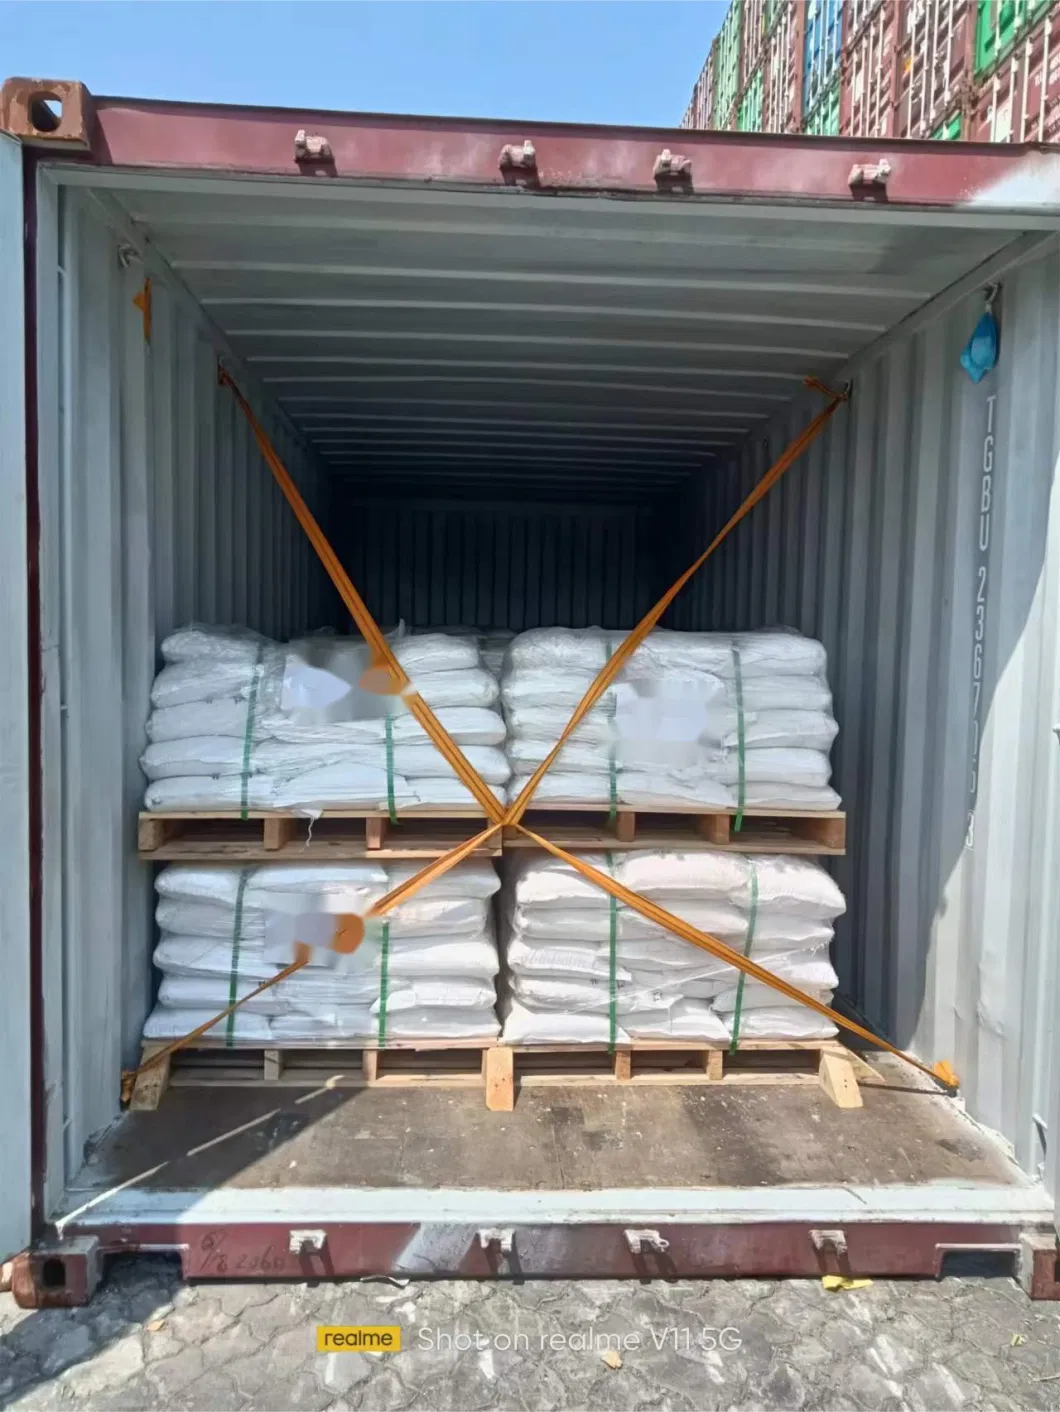 White Corundum Sand Suitable for Uncertain Resistant or Material and Other Fields